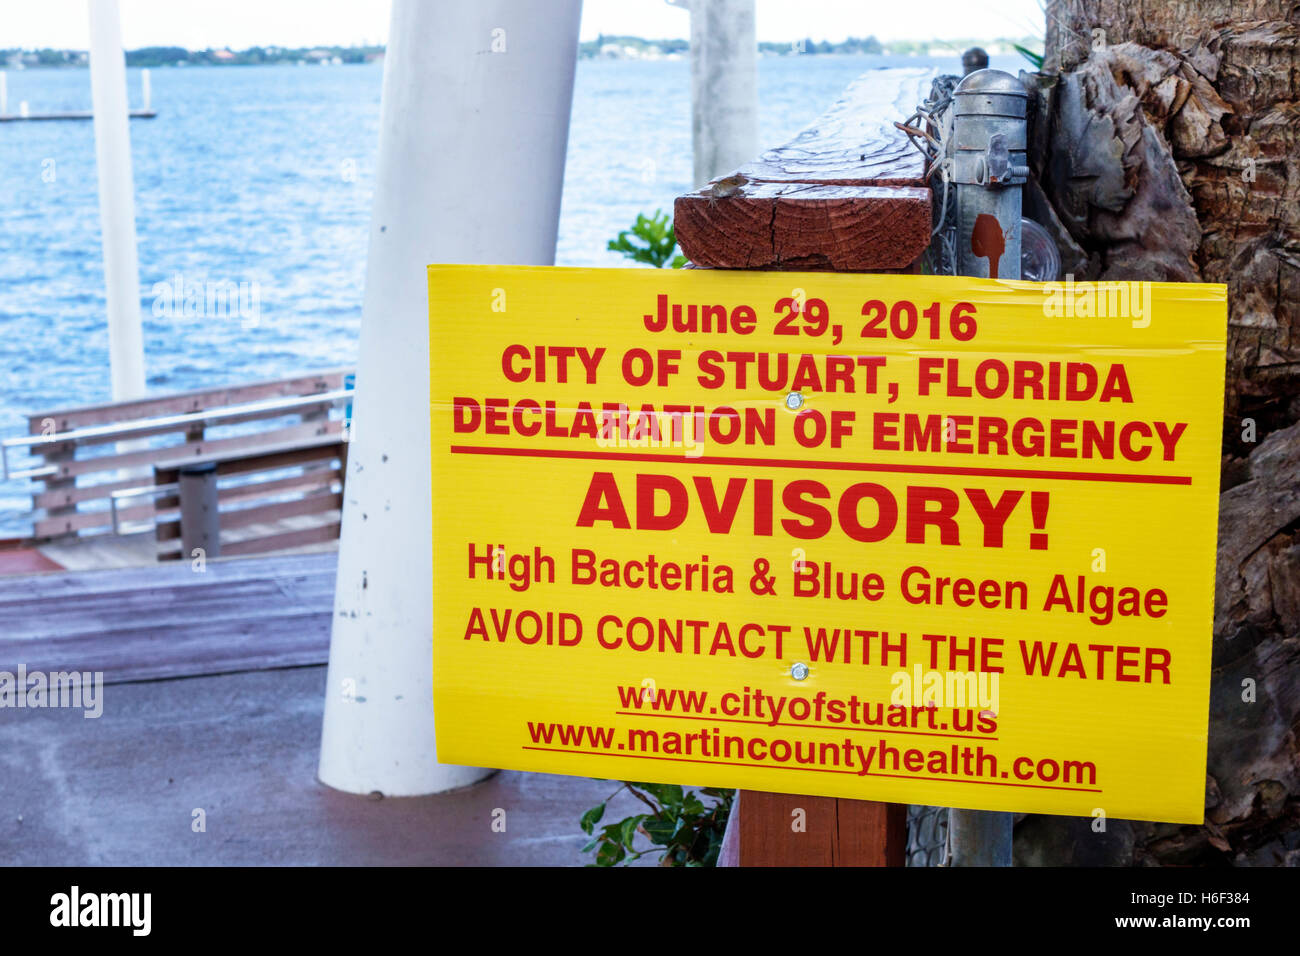 Stuart Florida,St. Saint Lucie River,city sign,declaration of emergency,high bacteria blue green algae,avoid contact with water,FL160806028 Stock Photo